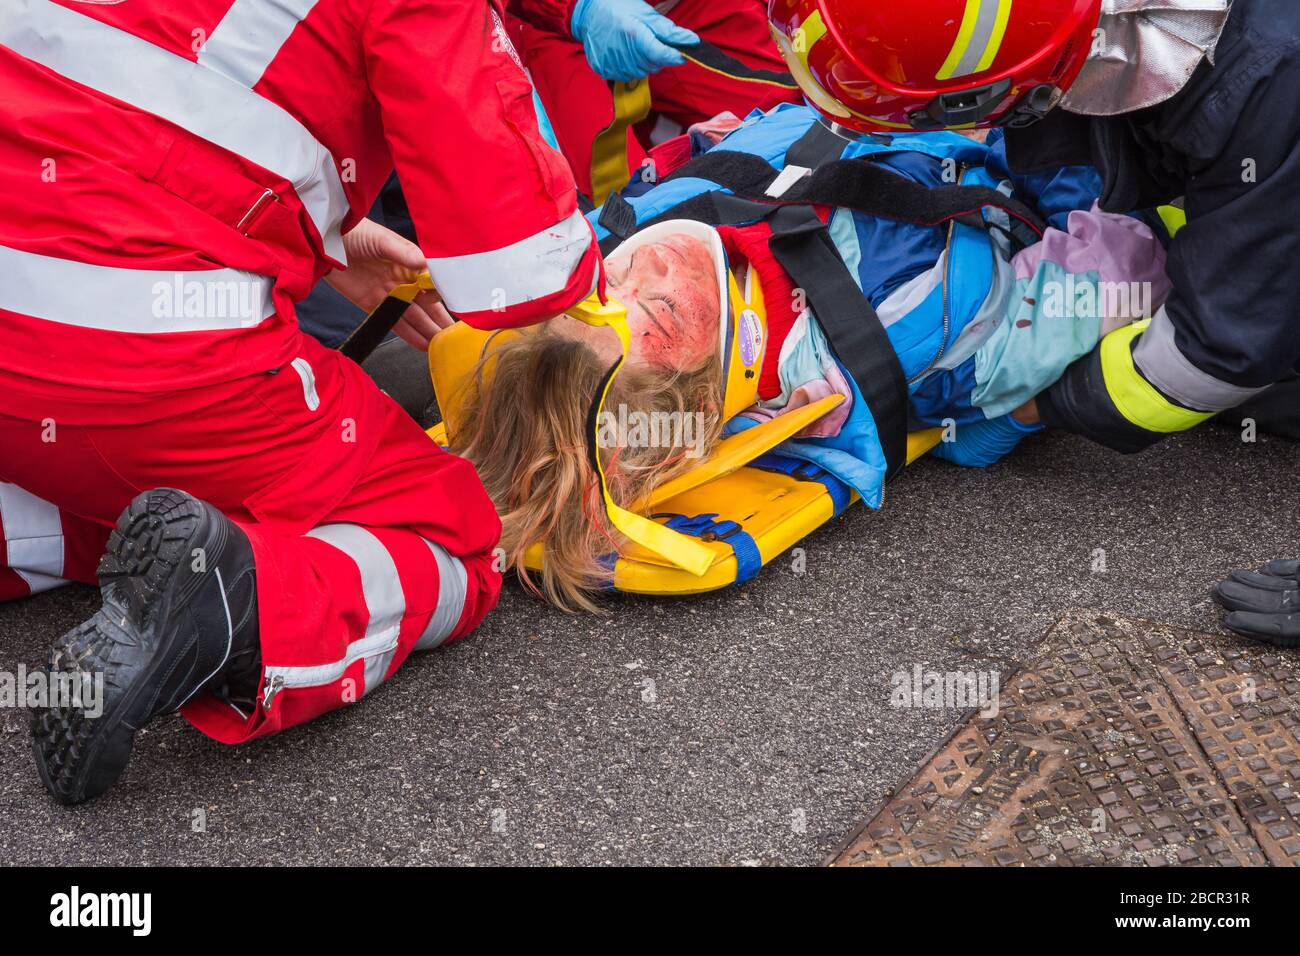 Emergency service personnel free an injured driver at the scene of a traffic accident during a training exercise.  firefighters, paramedics and Italia Stock Photo